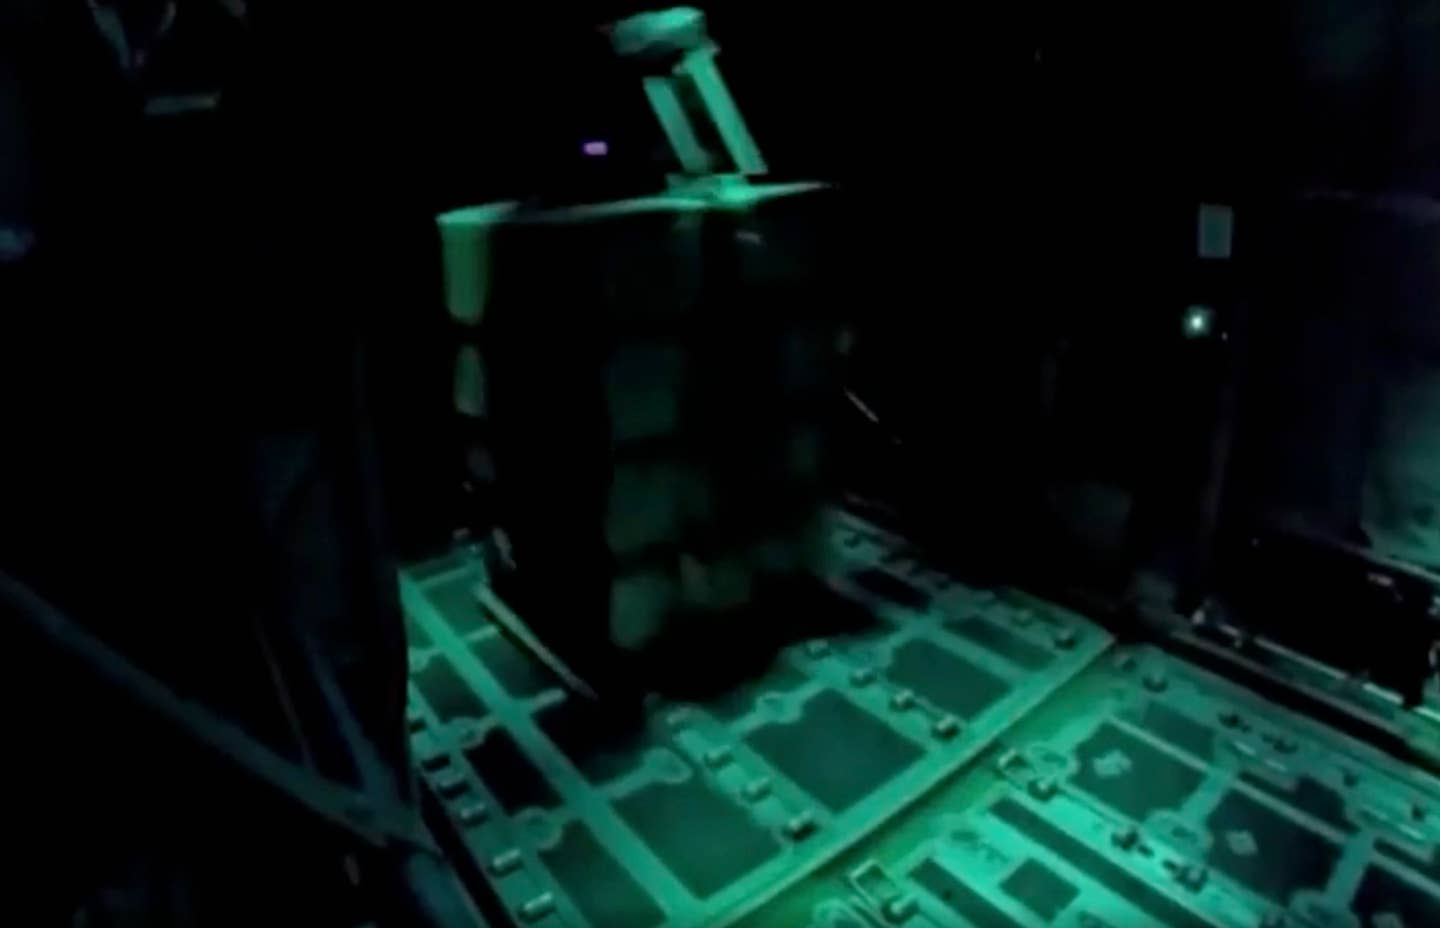 A container of water features a device on top that could be an autonomous guidance system. (IDF video screencap)